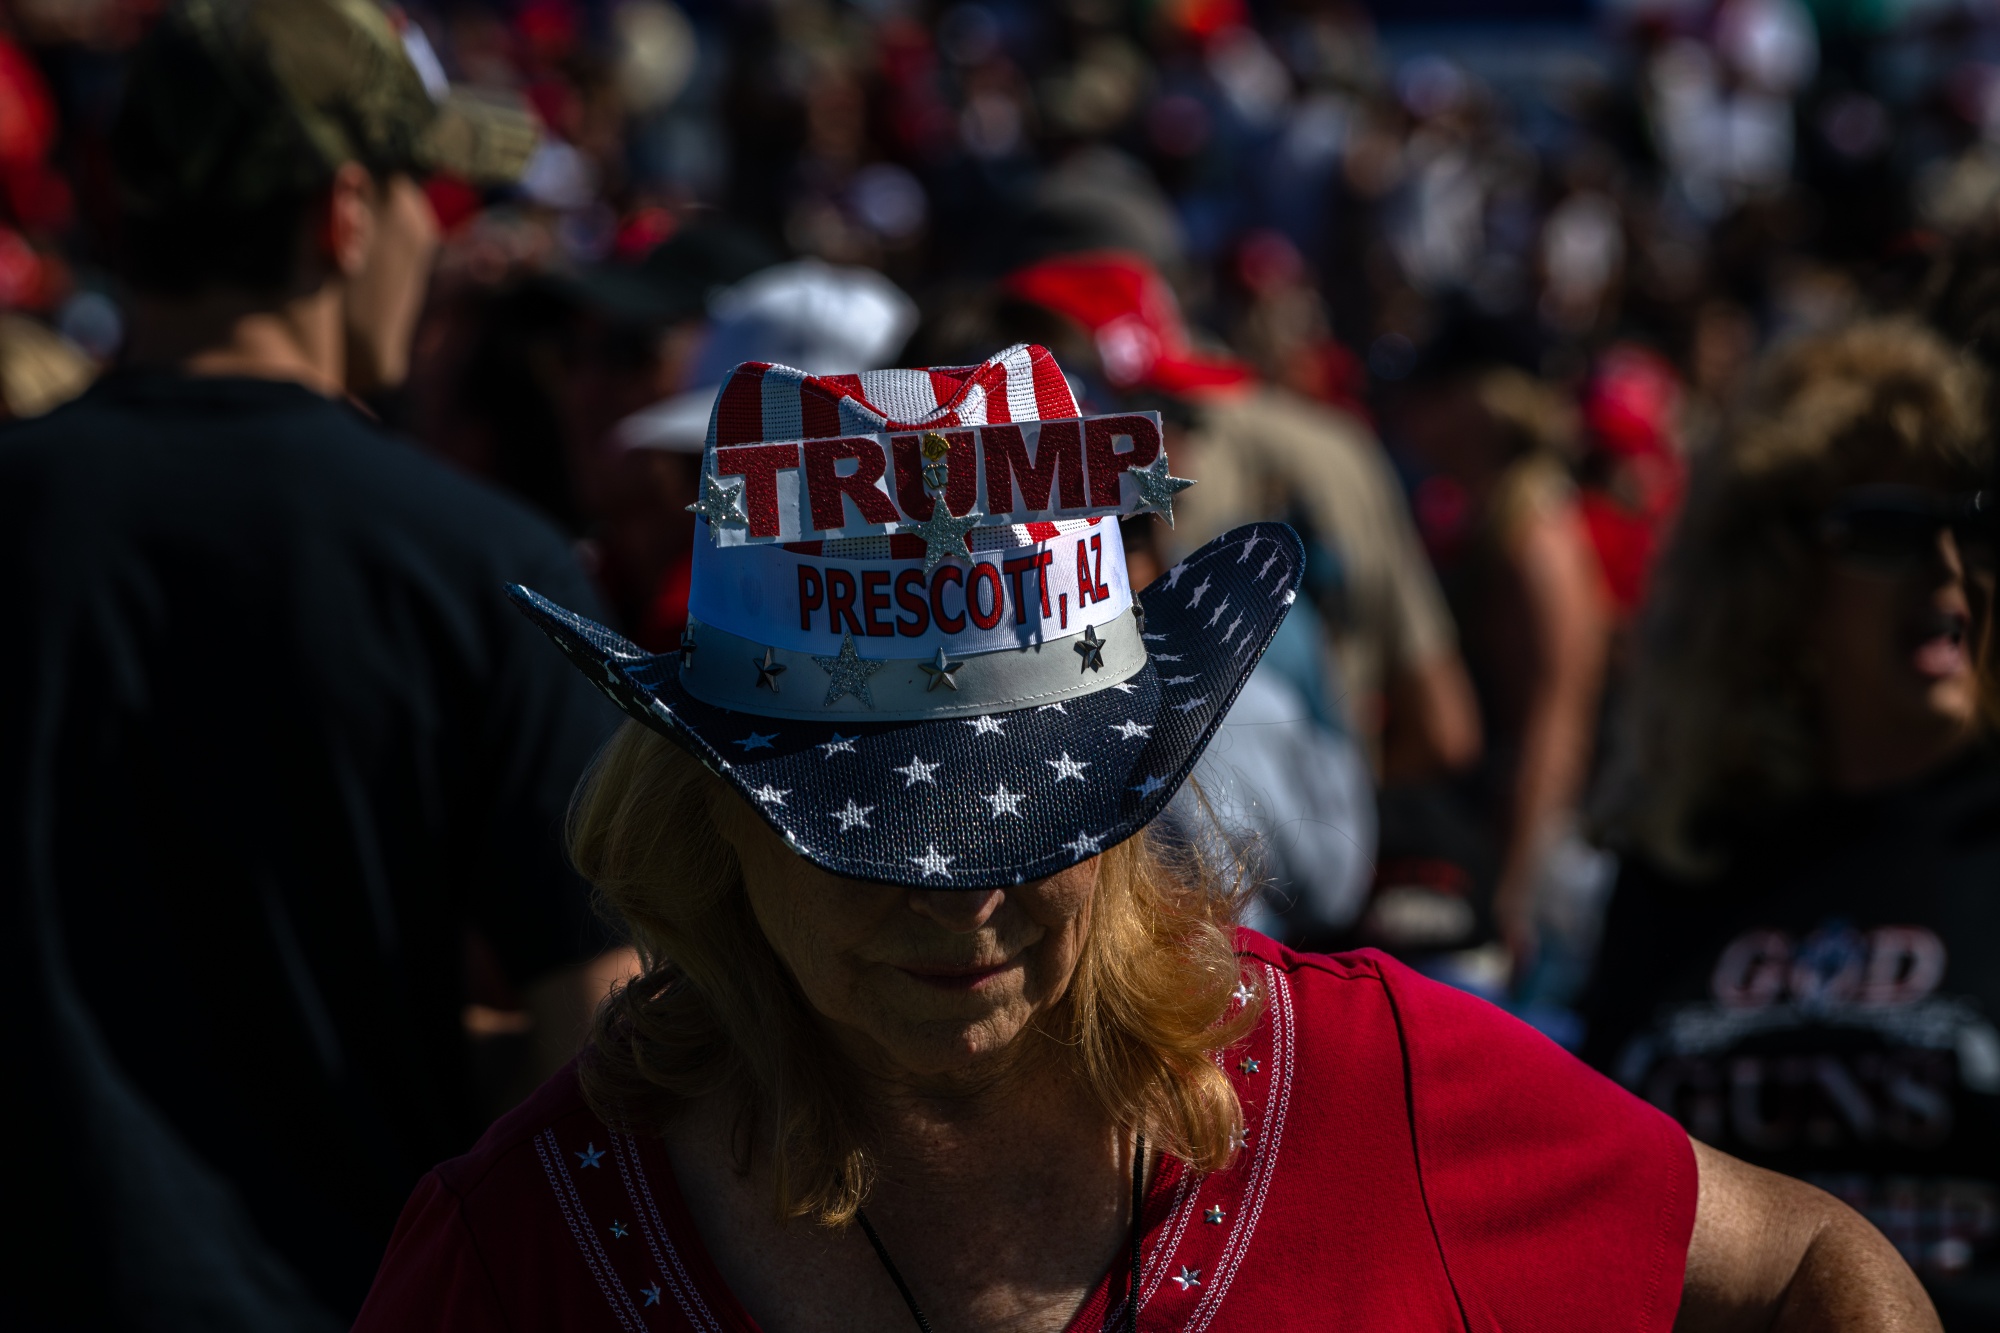 An attendee wears a hat displaying the colors of the American flag ahead of the arrival of Donald Trump at a Make America Great Again rally in Prescott, Arizona, on Oct. 19.